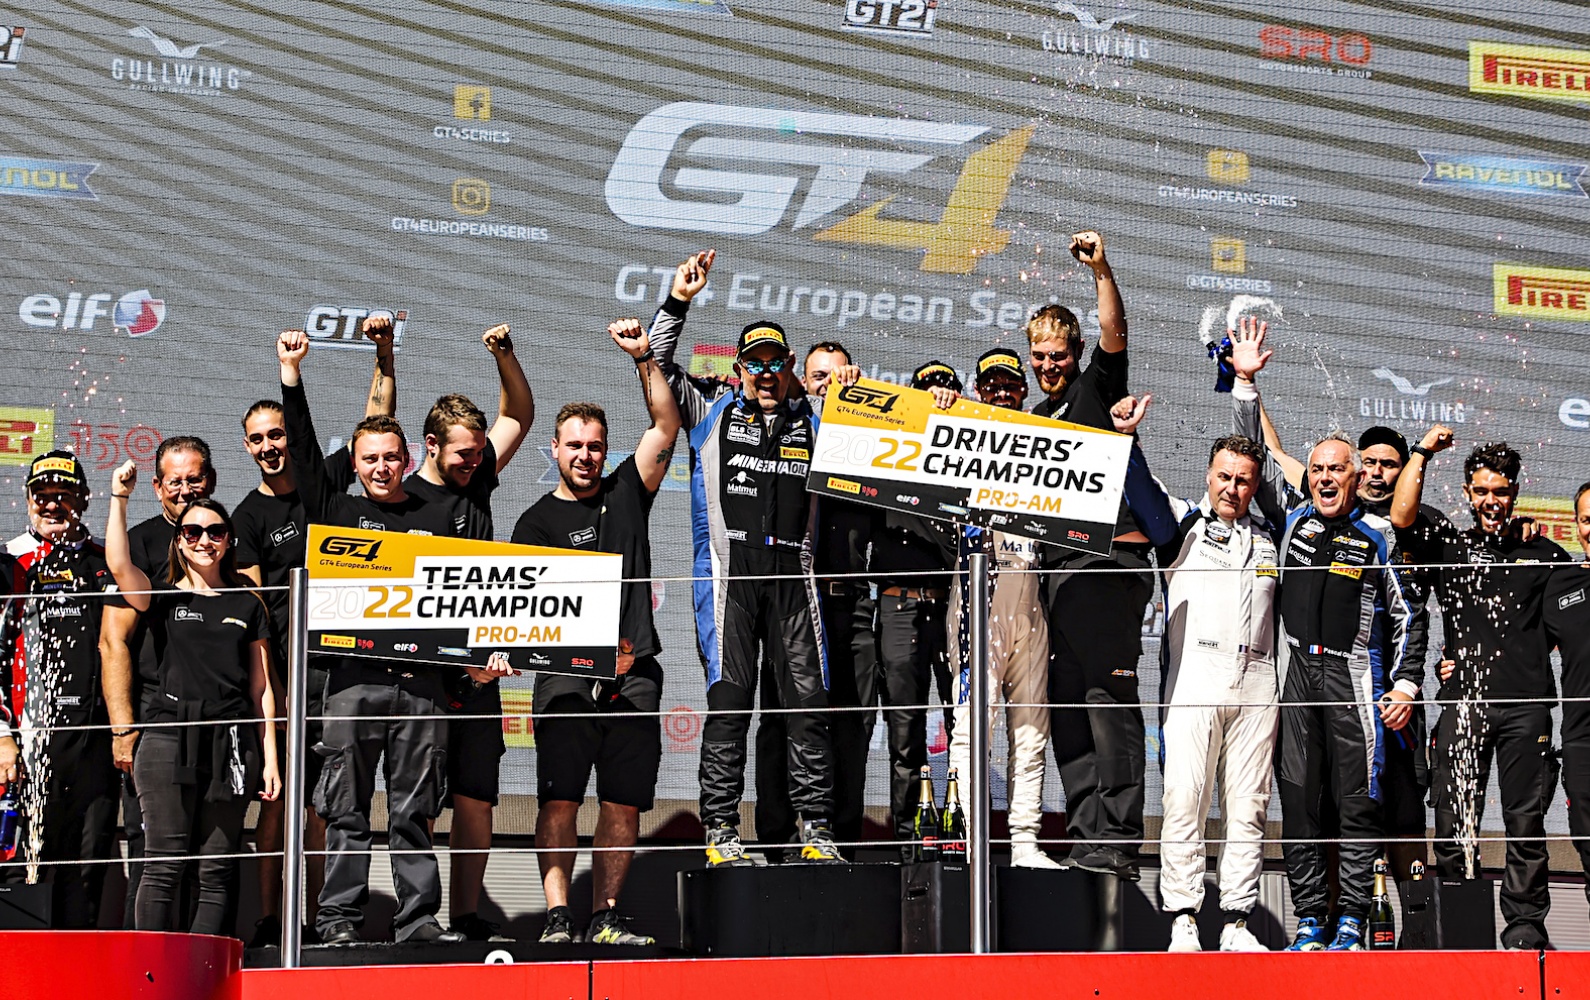 GT4 European Series (Barcelona) - Three crowns and a vice-champion title!